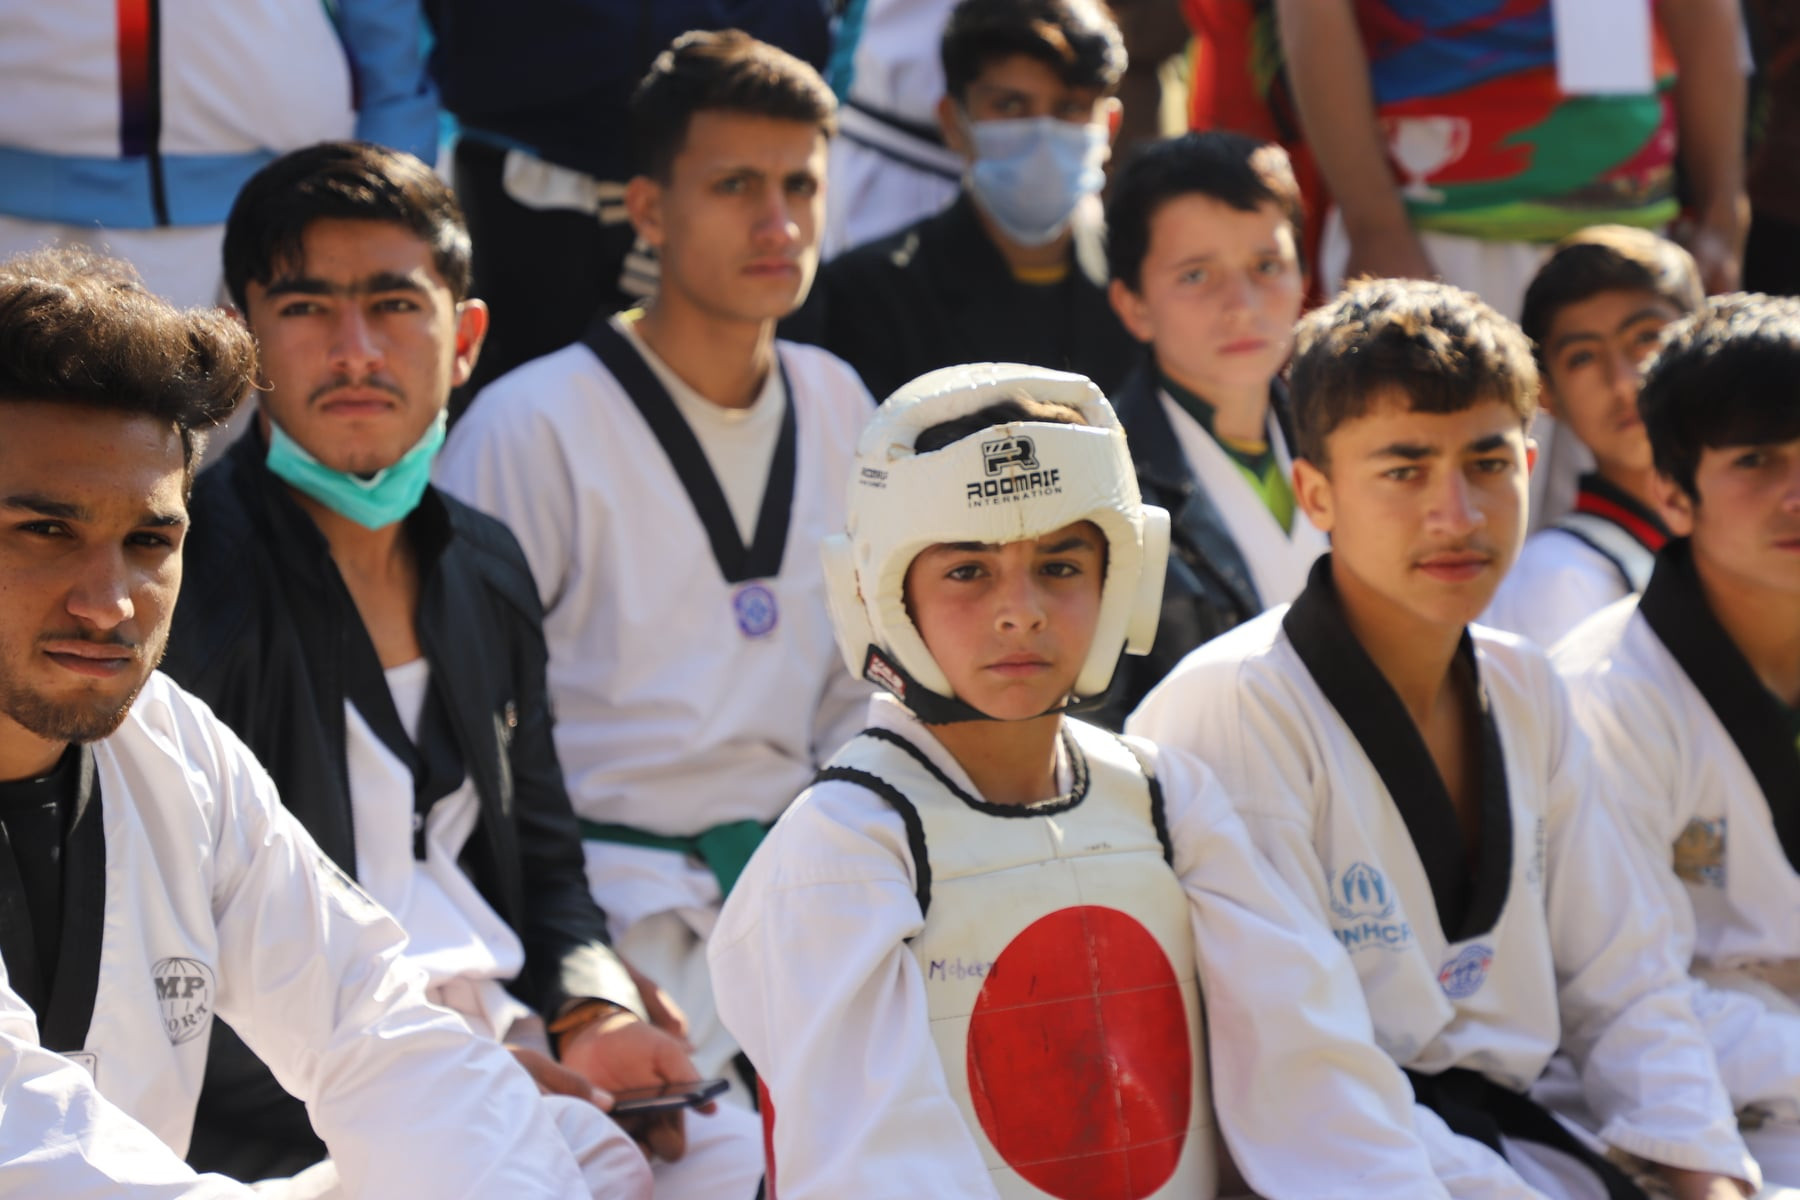 Taekwondo was one of two sports played at the three-day event ©UNHCR/Z. Saleah